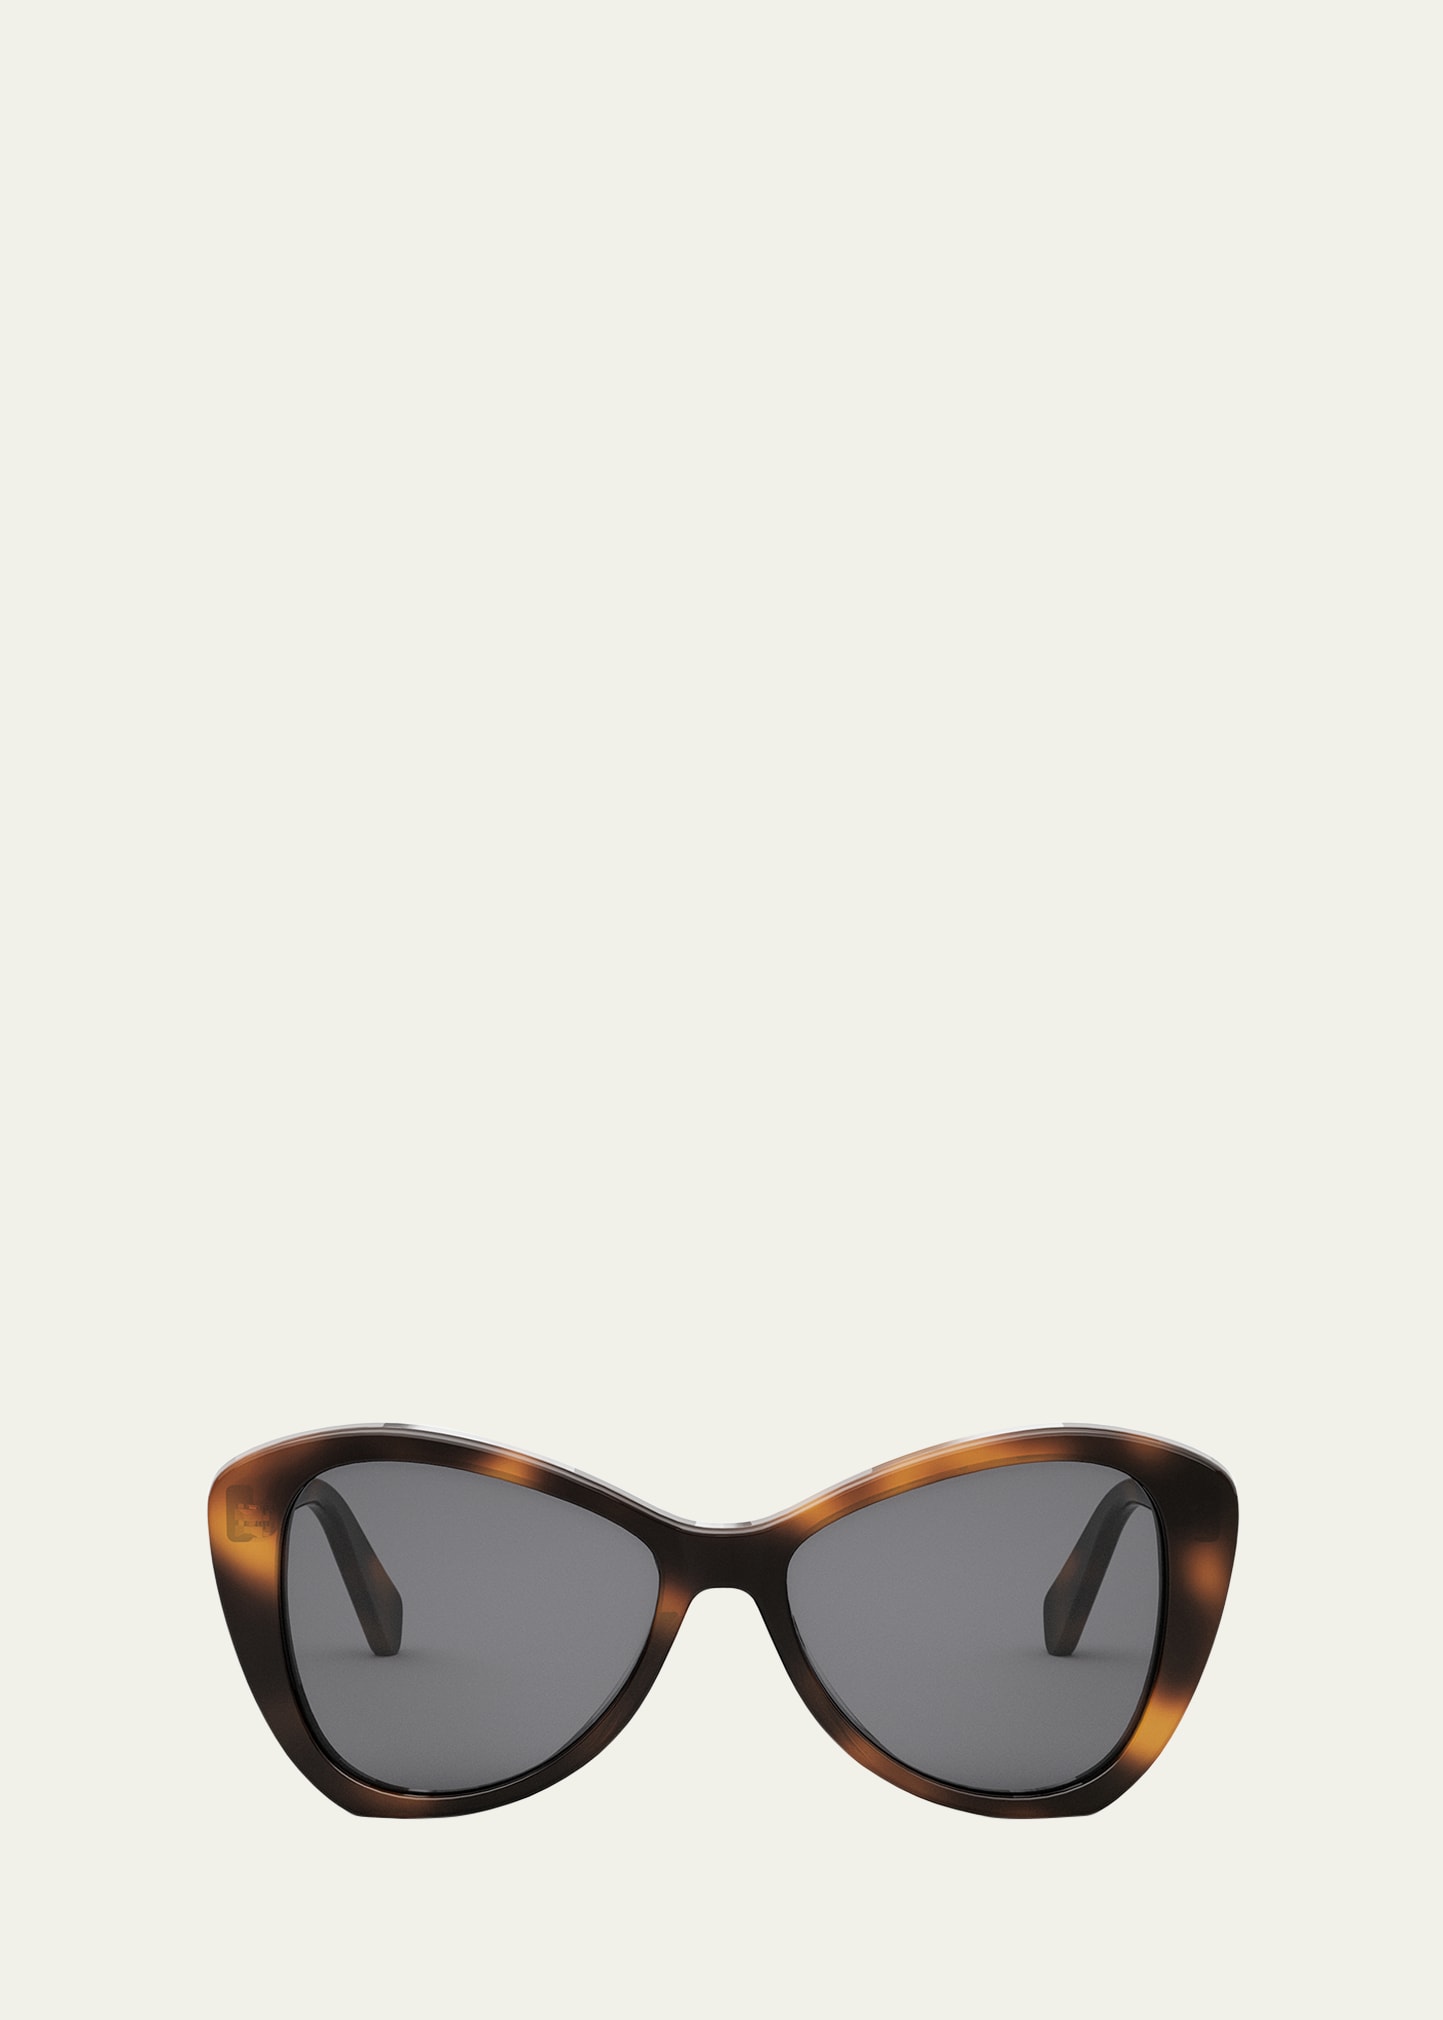 CELINE THIN ACETATE BUTTERFLY SUNGLASSES